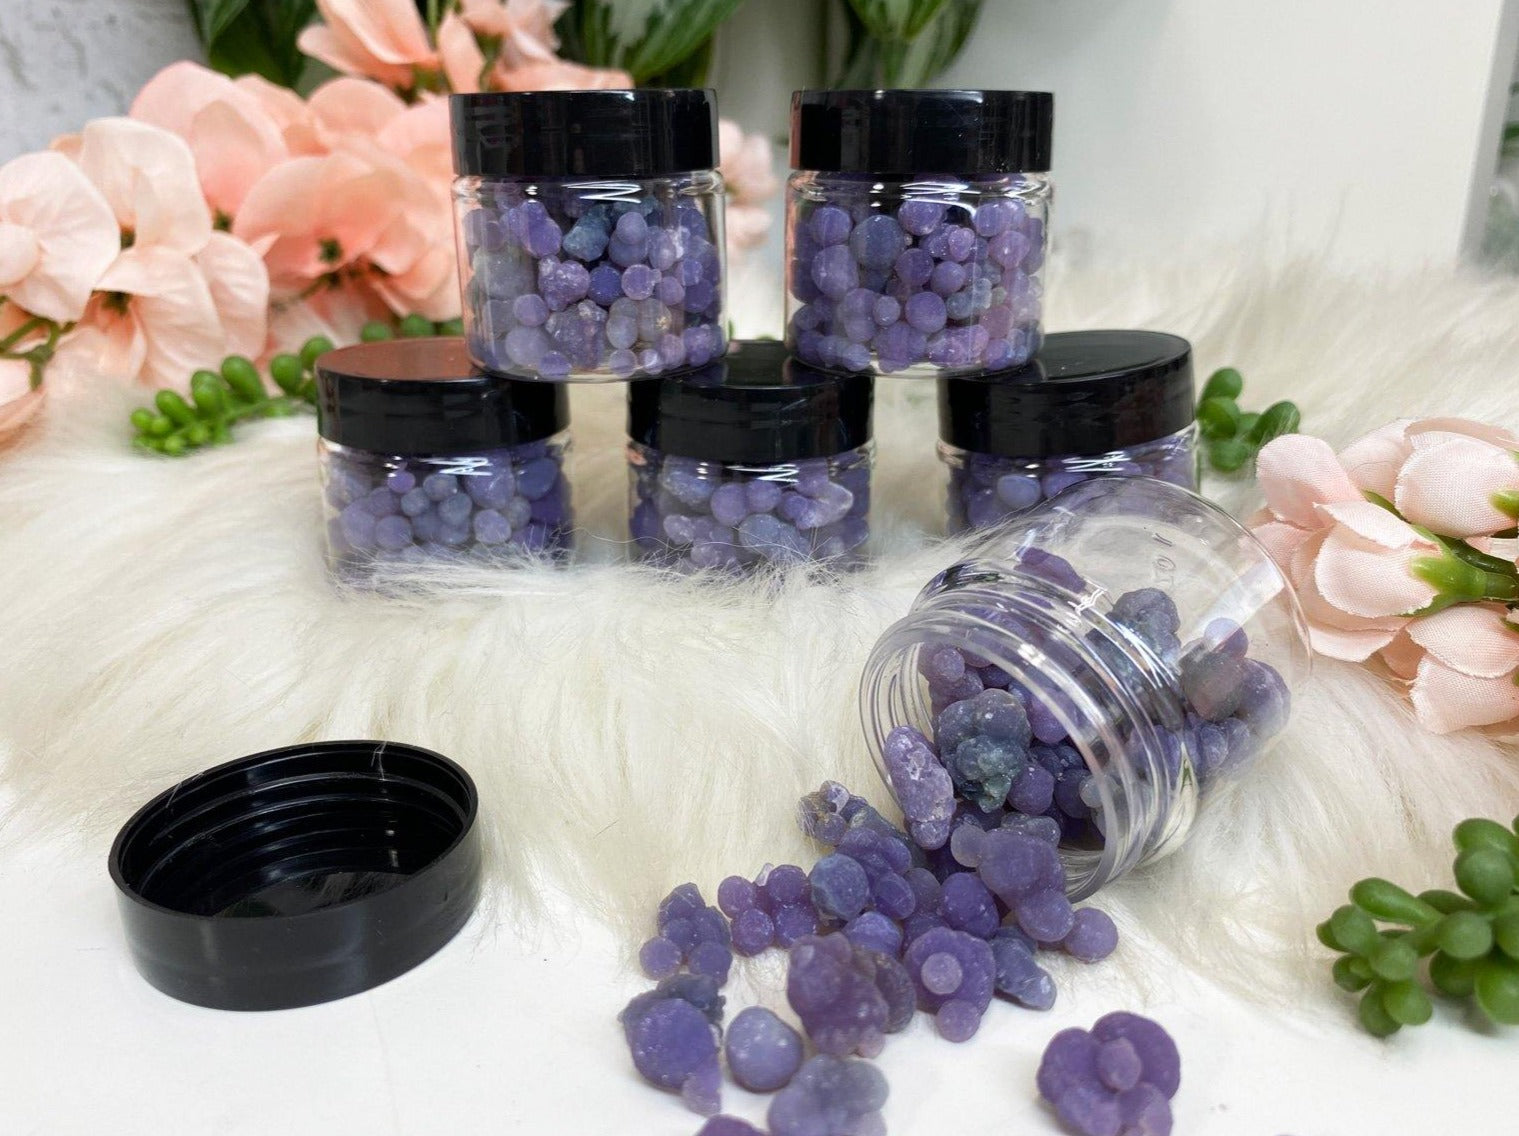 Grape agate jars with small purple chalcedony grape agate crystal balls